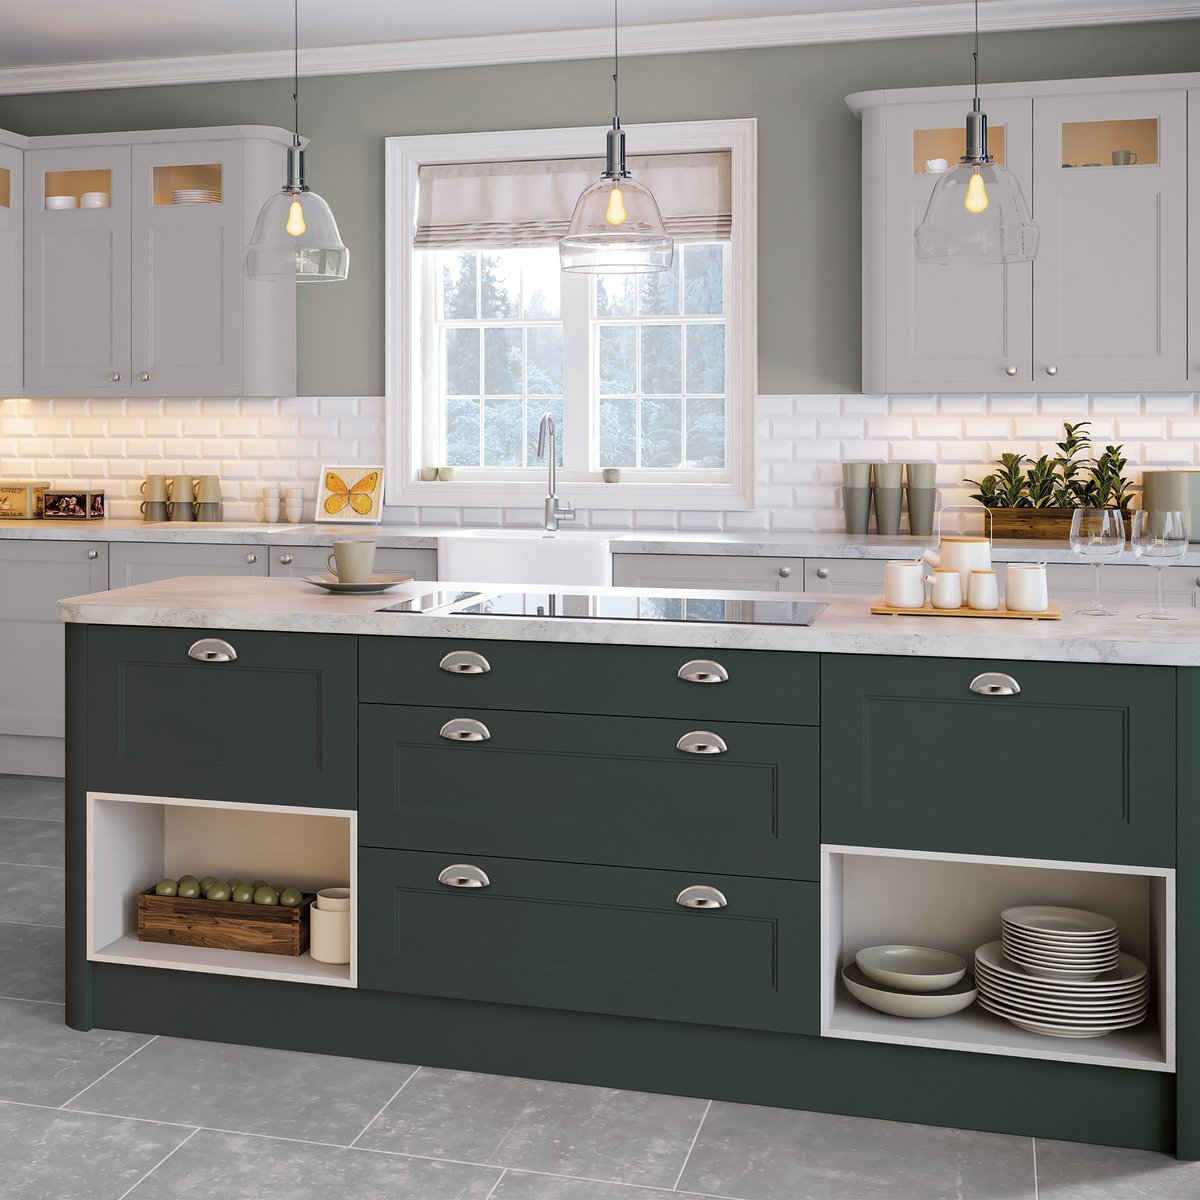 Considering a kitchen island upgrade? Our Hewish kitchen comes in 7 stunning colour options with a sleek matt vinyl finish. But what sets this island apart? It has low-level shelving right at its heart! Not only does it look gorgeous, but it's incredibly practical too! Ready…